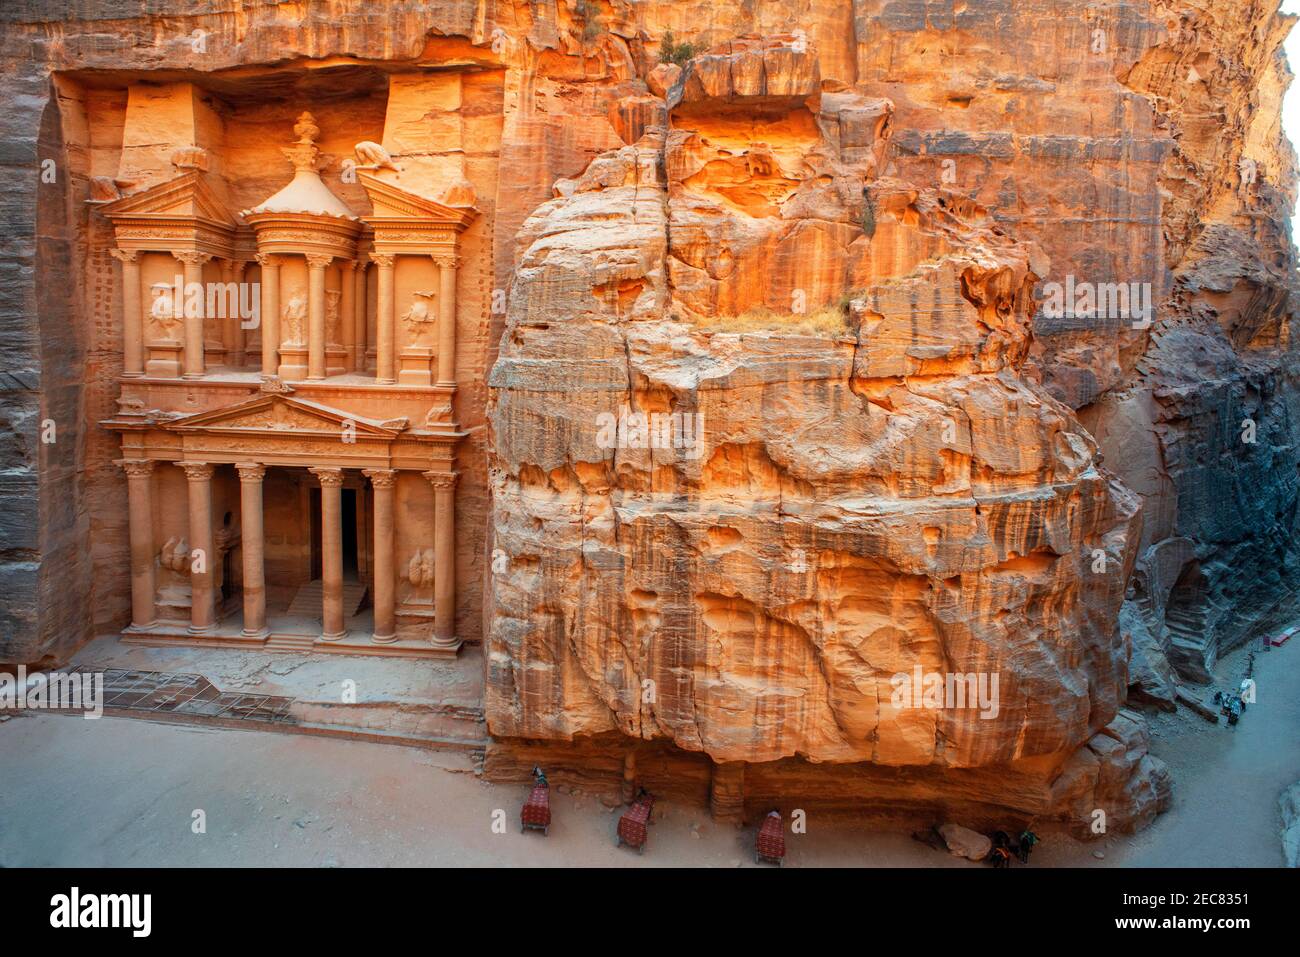 The Treasury, El Khazneh, Petra, Jordan. Petra is a historical and archaeological city in the southern Jordanian governorate of Ma'an that is famous f Stock Photo